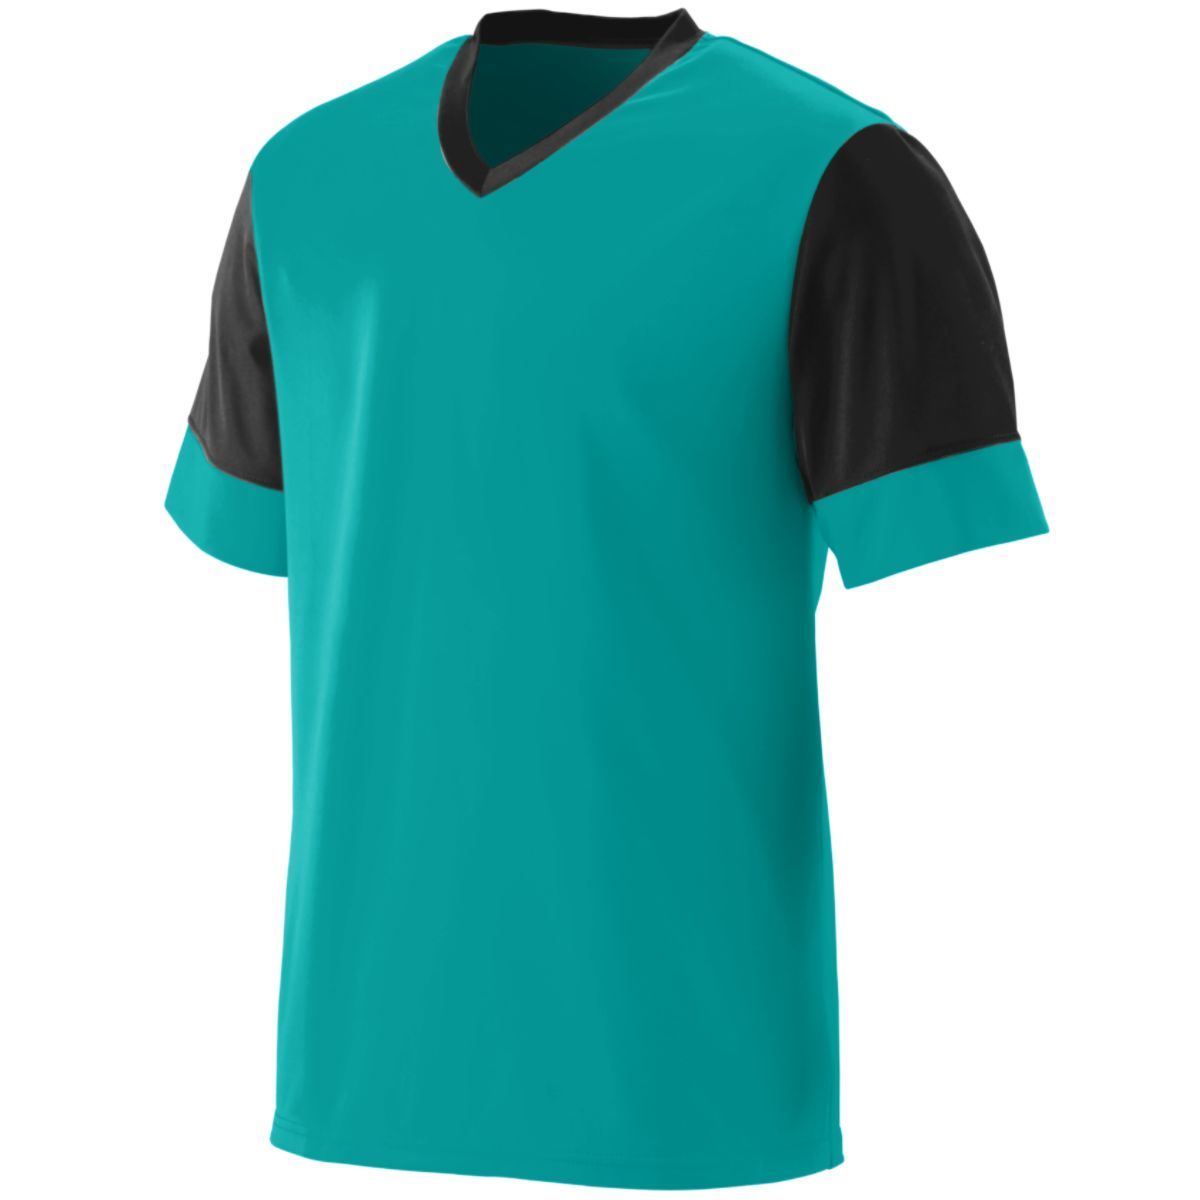 Augusta Sportswear Youth Lightning Jersey in Teal/Black  -Part of the Youth, Youth-Jersey, Augusta-Products, Soccer, Shirts, All-Sports-1 product lines at KanaleyCreations.com